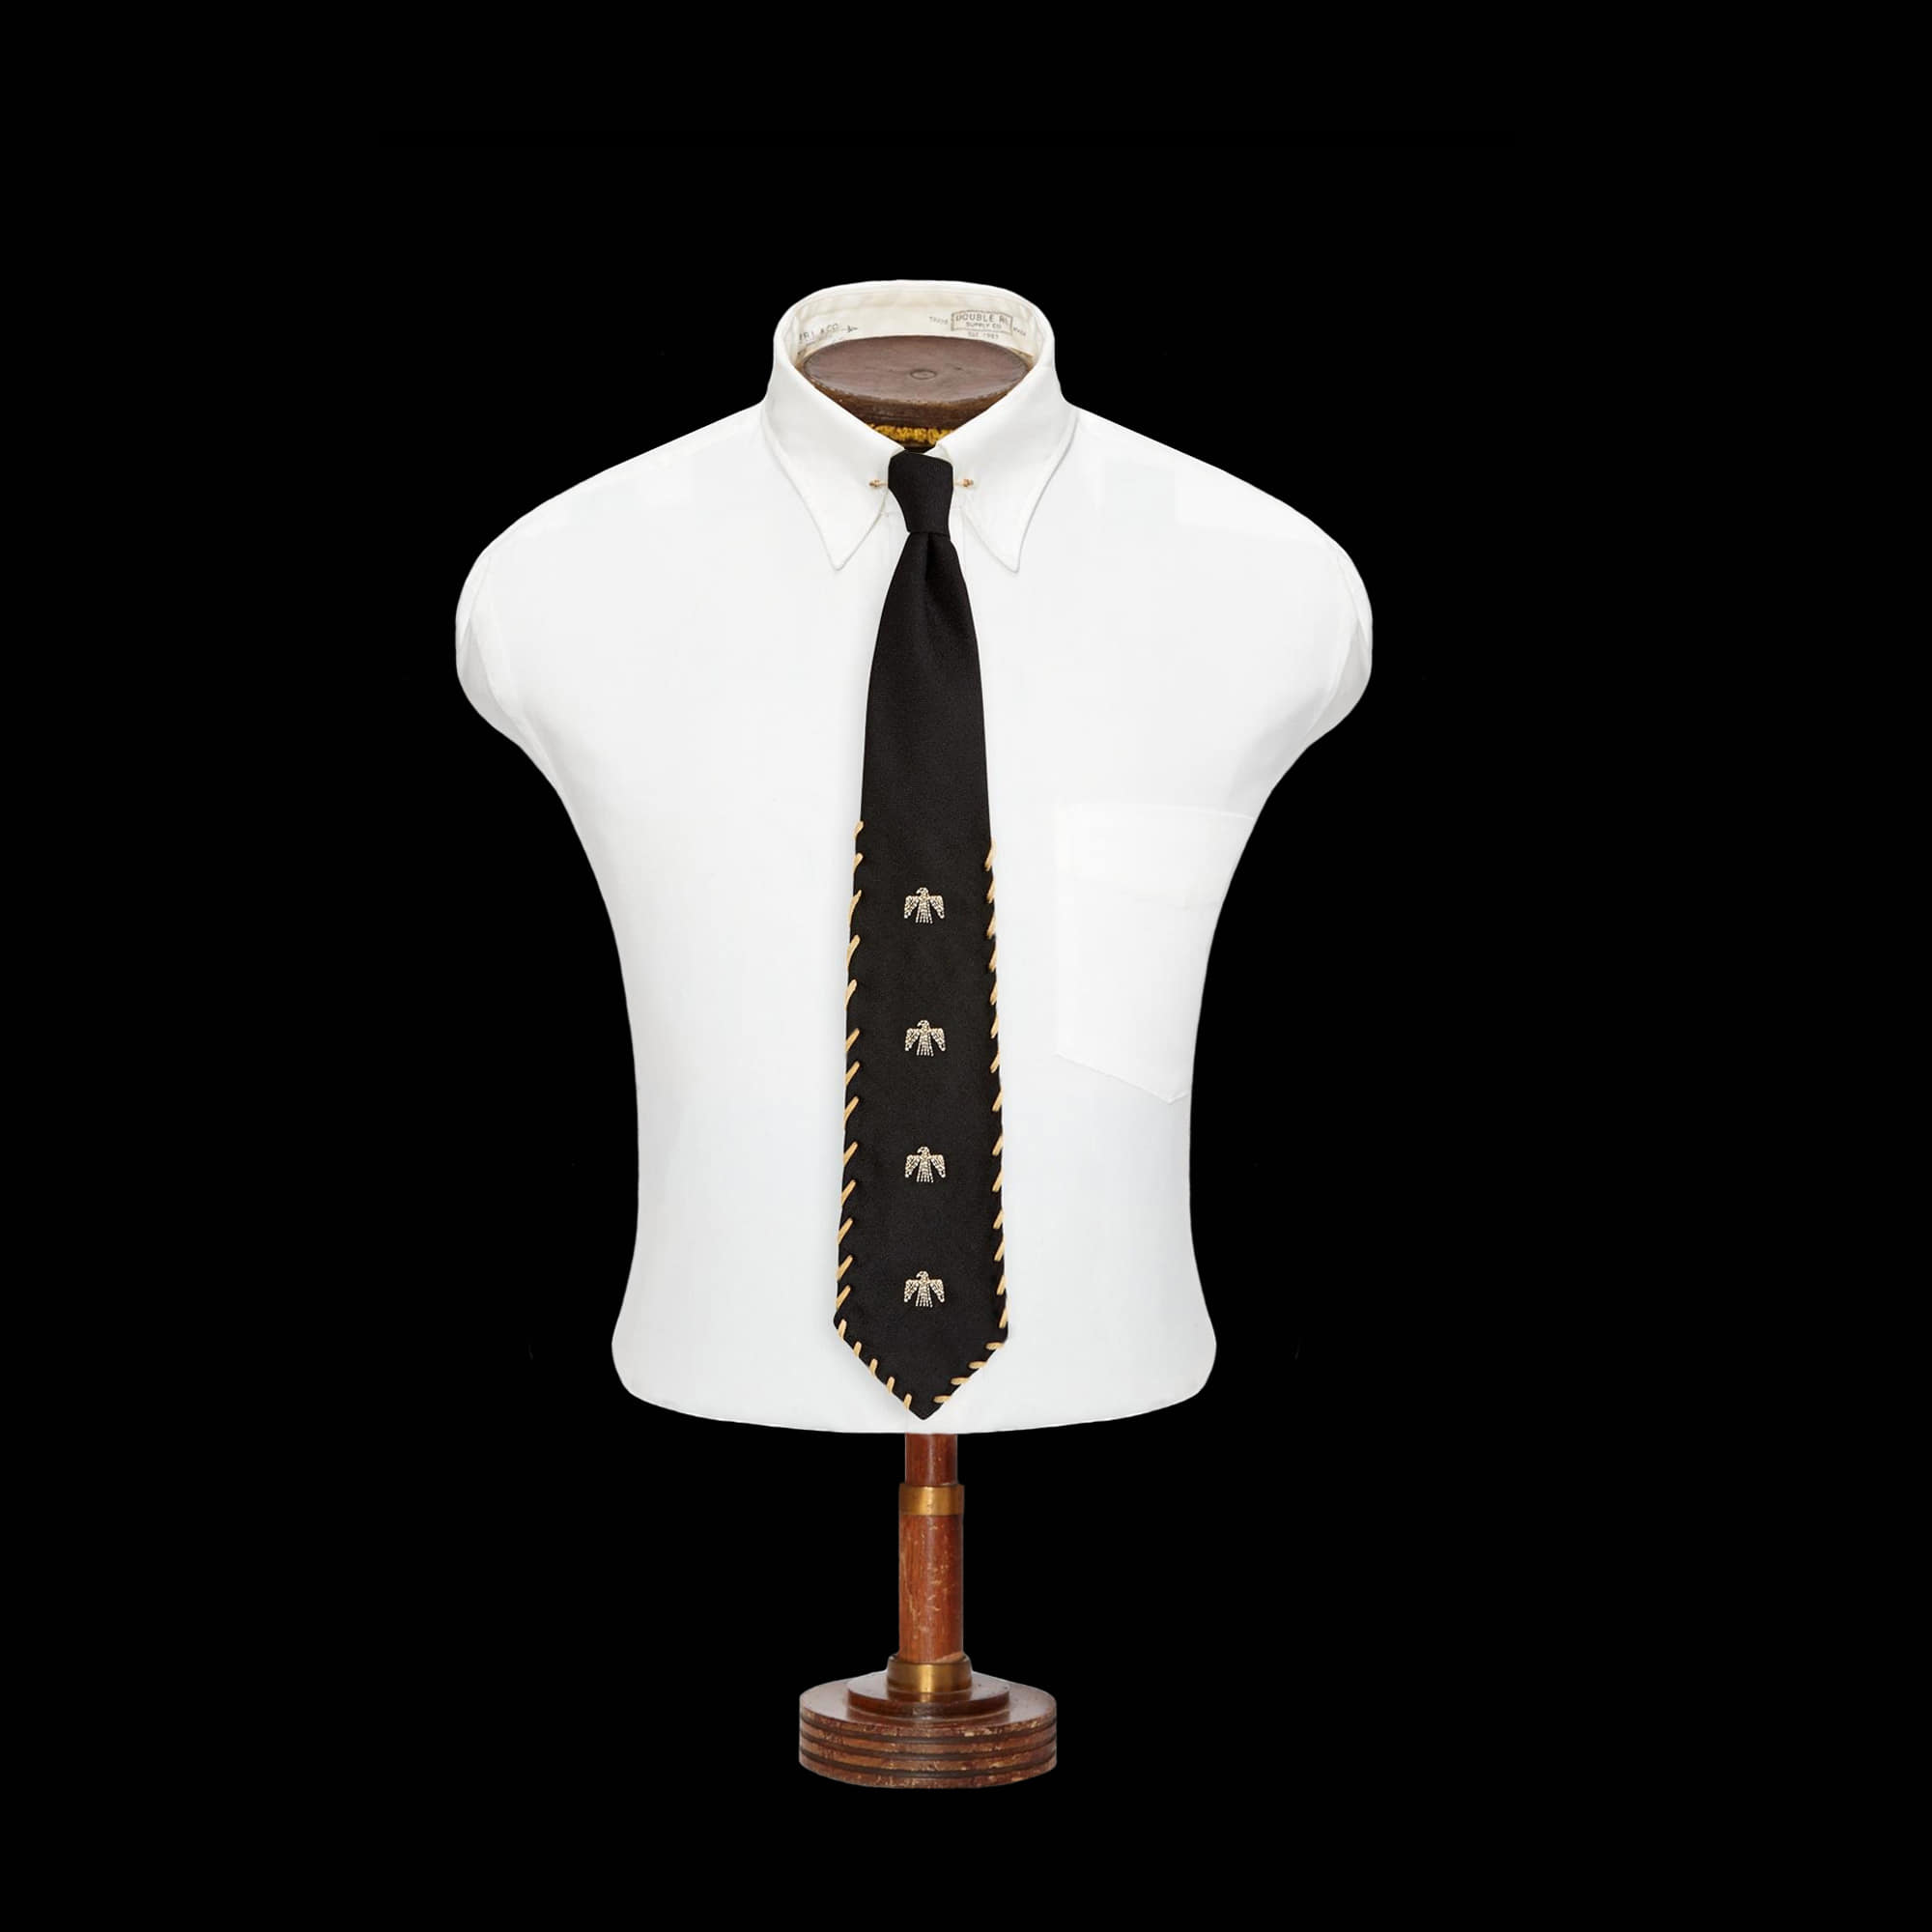 RRLHANDMADE EMBROIDERED TIE